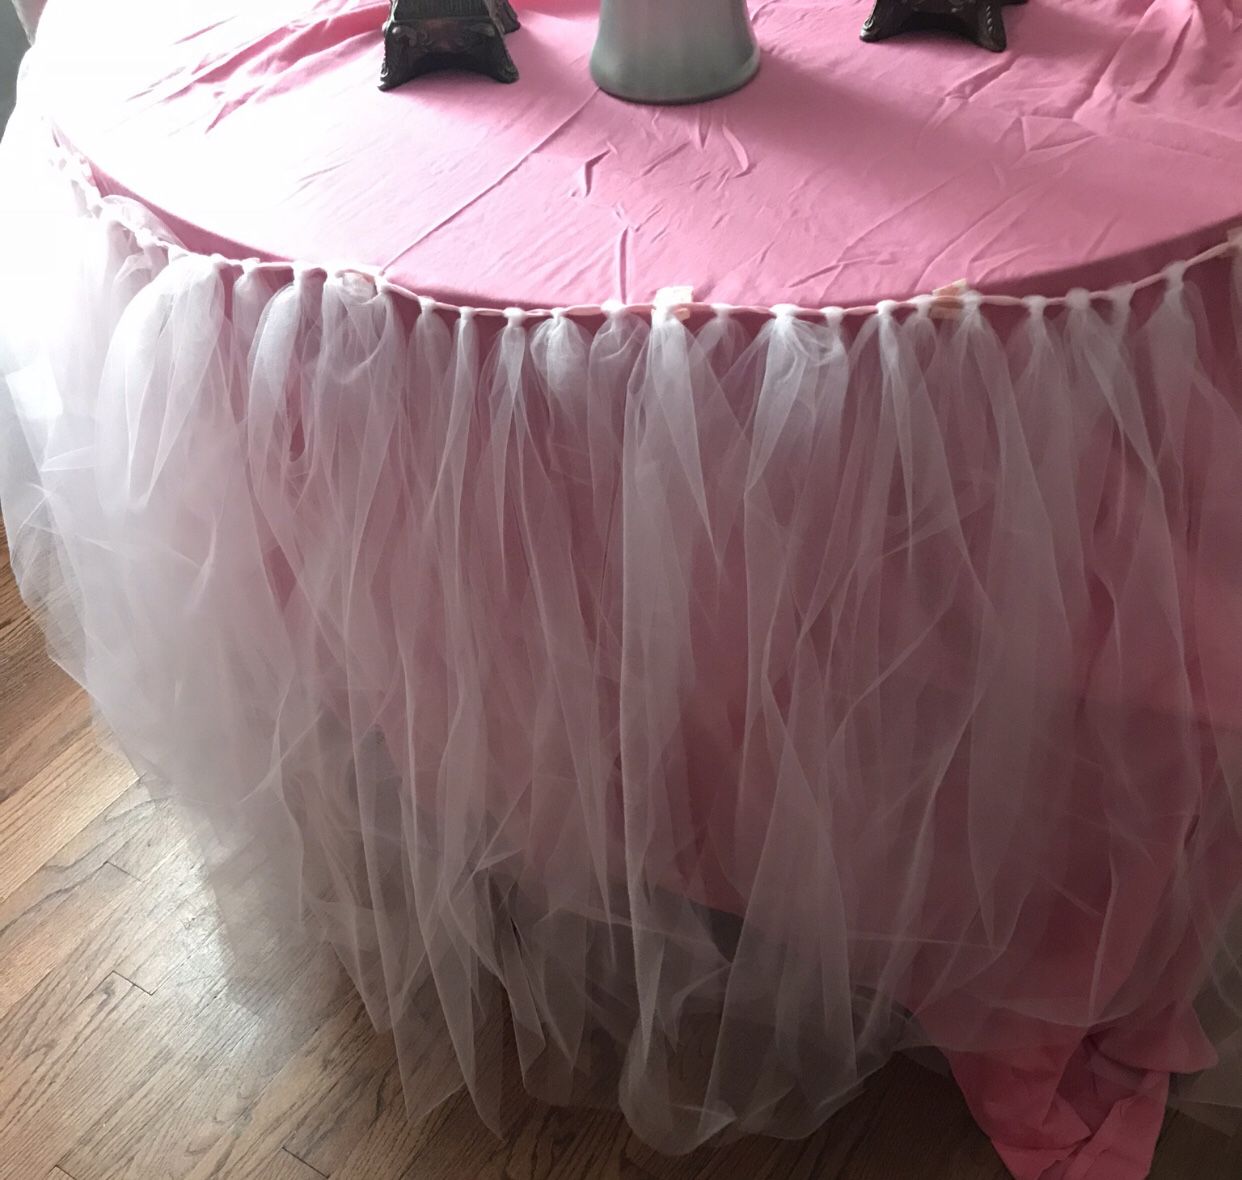 Pink tulle table skirt